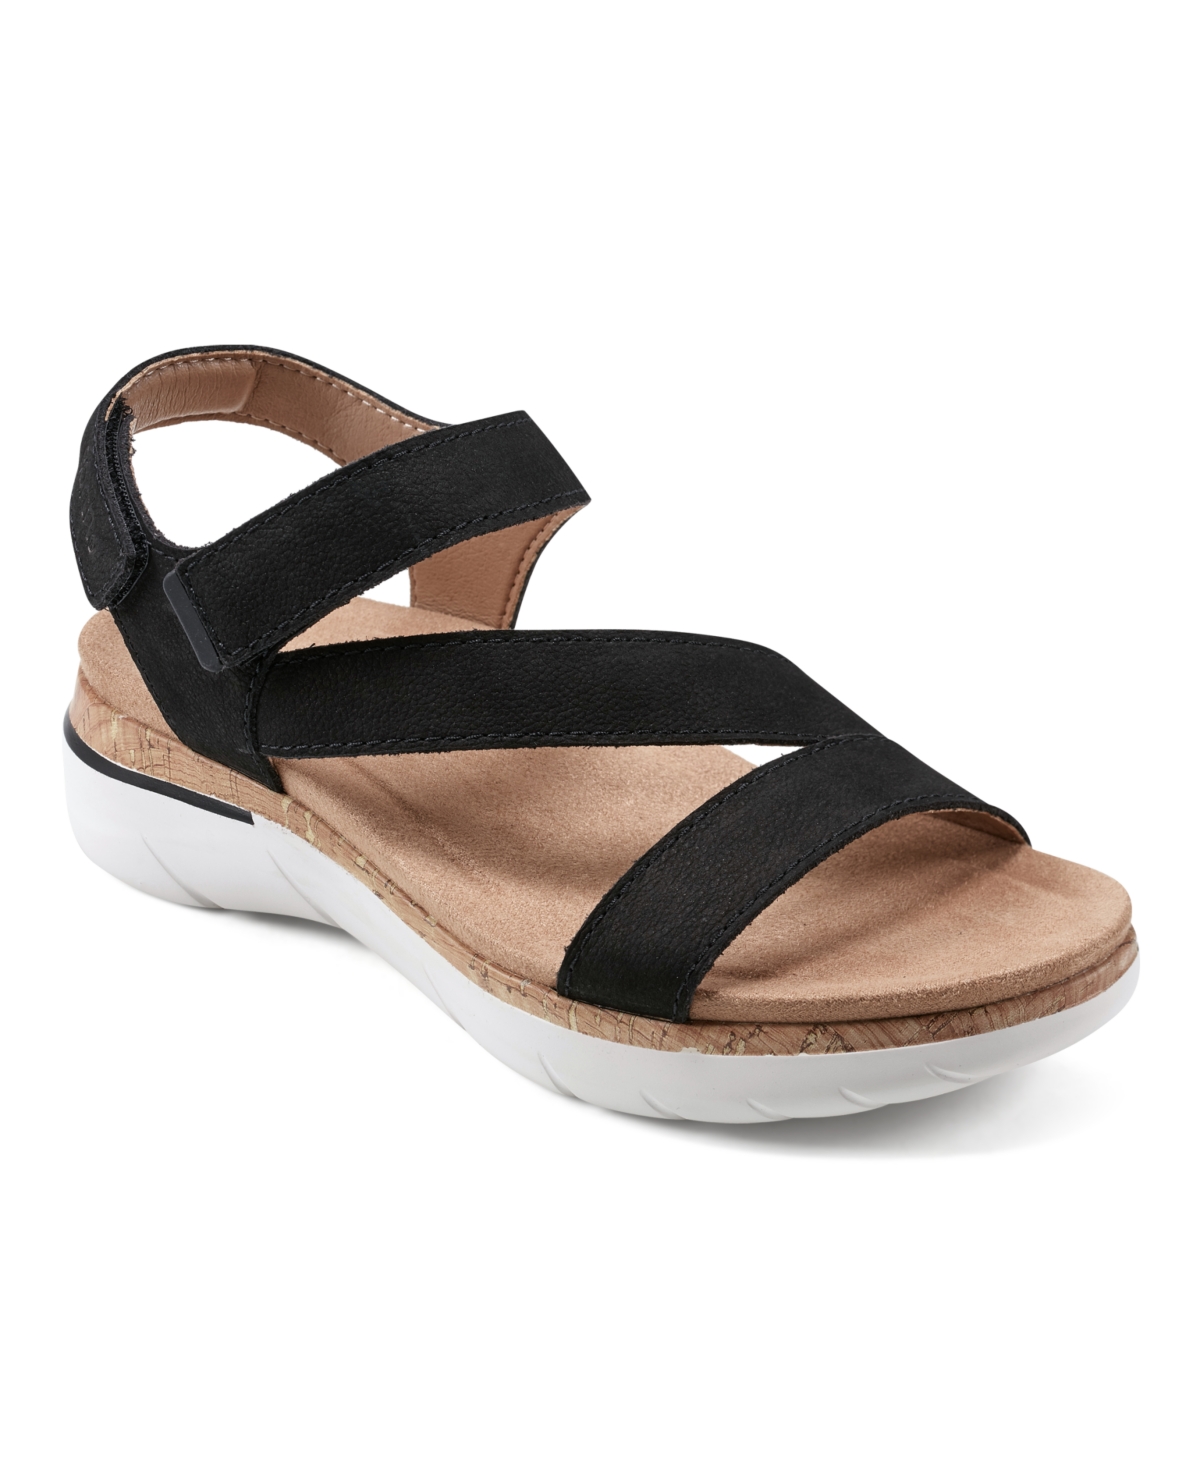 Earth Women's Roni Almond Toe Flat Strappy Casual Sandals - Medium Natural Leather